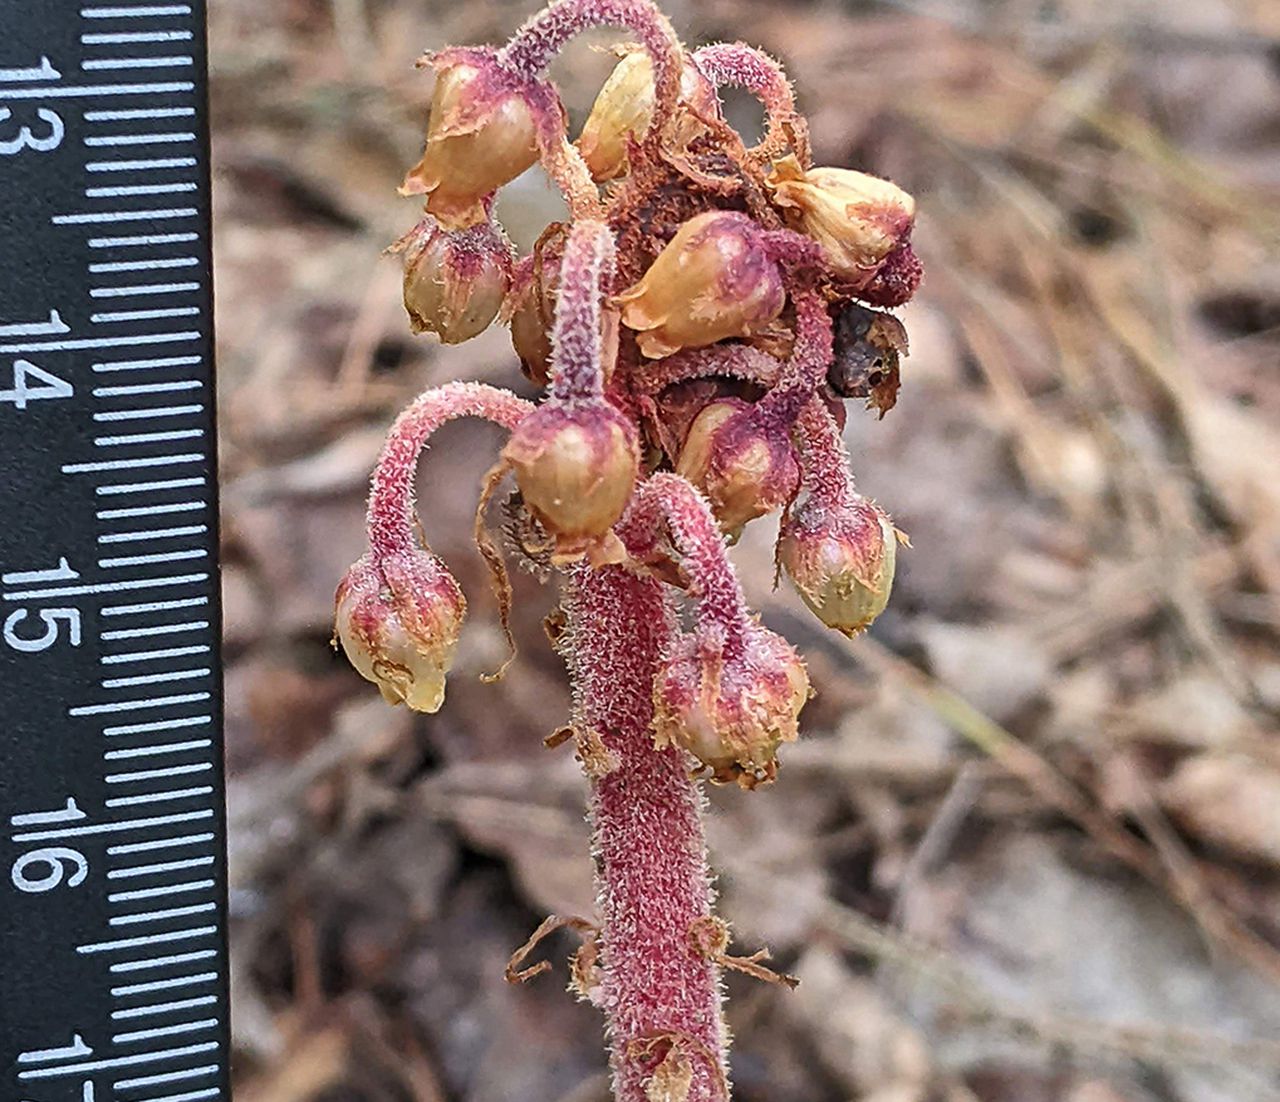 Flower discovered for the 1st time in Massachusetts